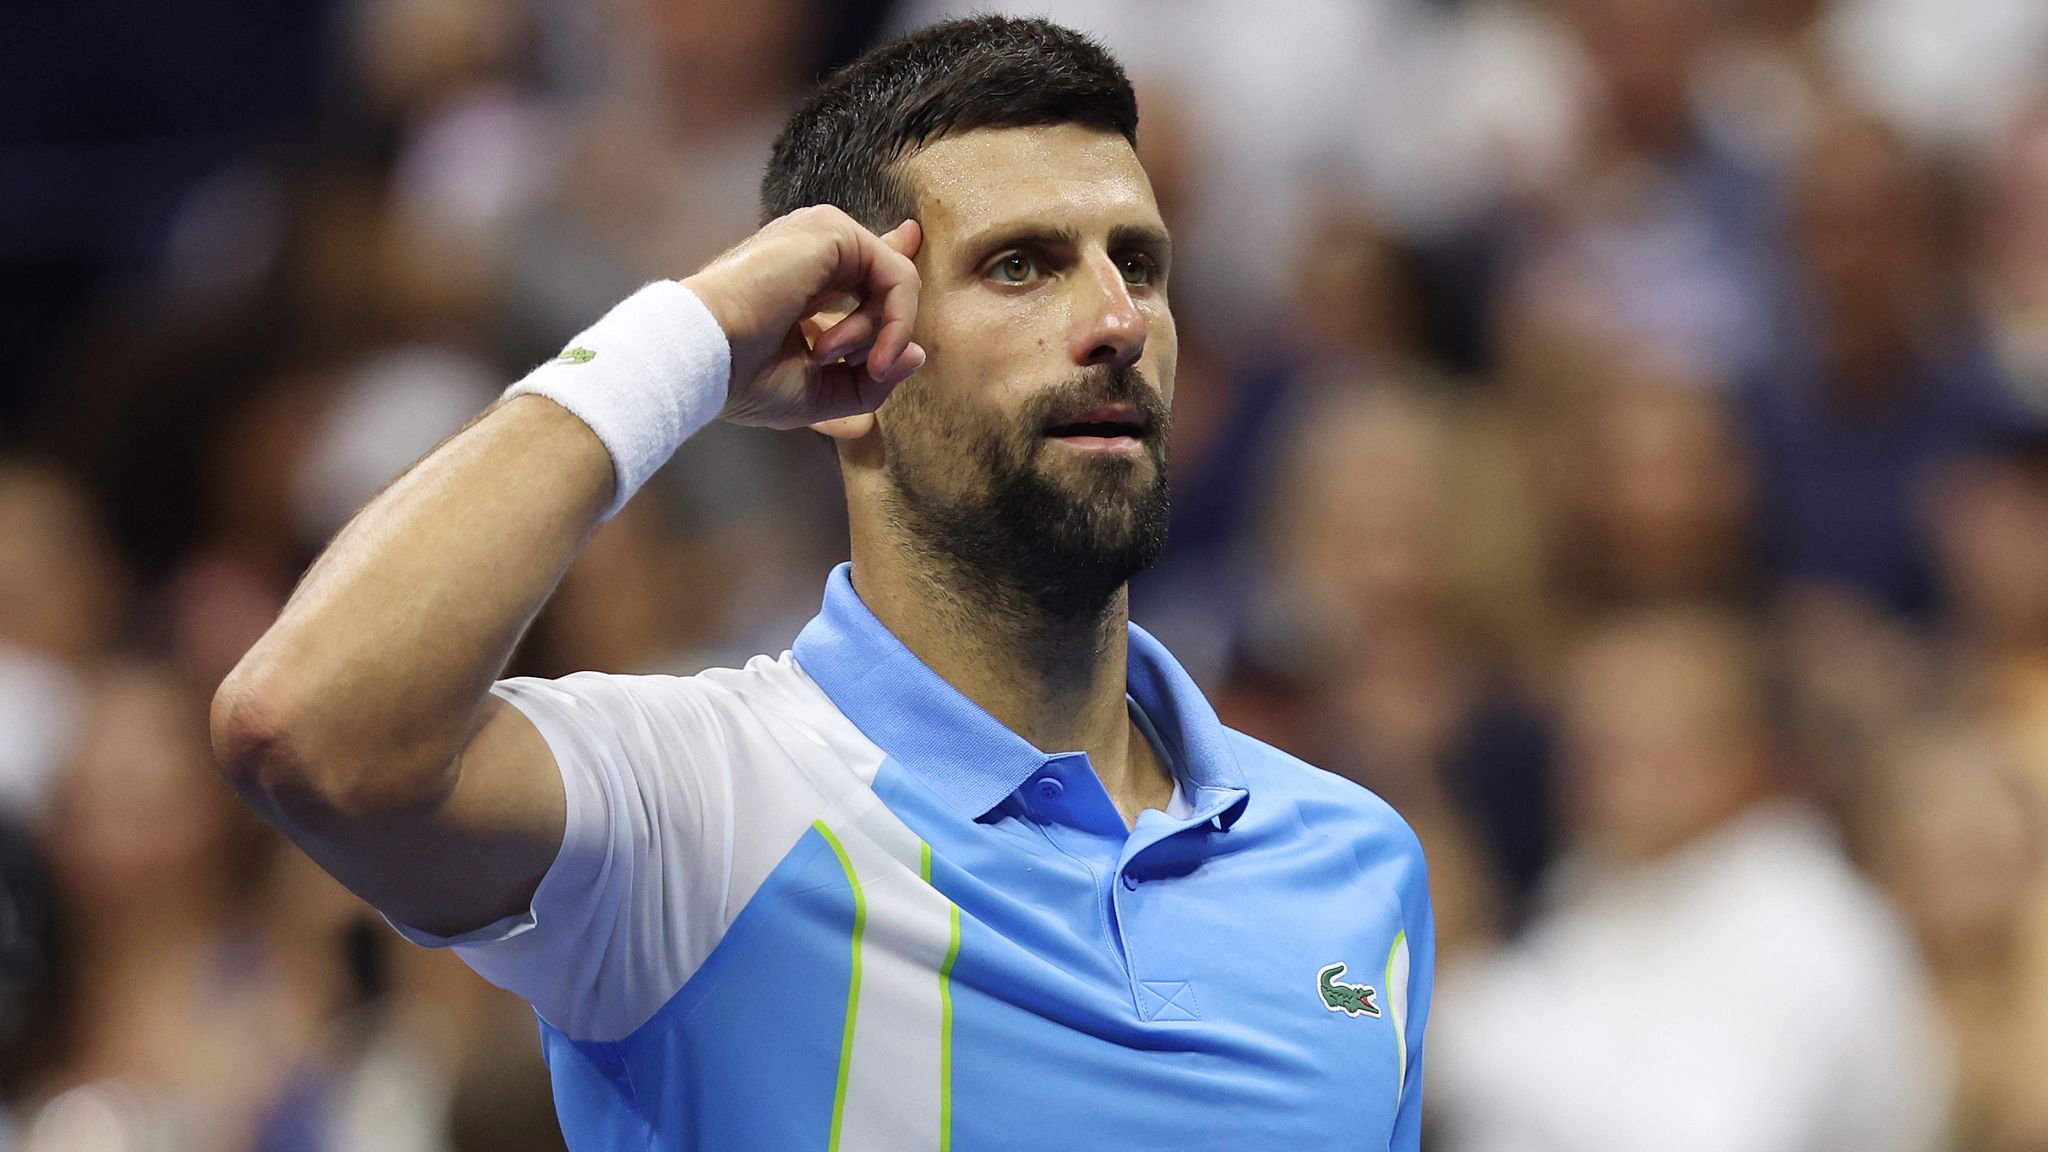 US Open Novak Djokovic outclasses Ben Shelton to stay on course for record-equalling 24th Grand Slam Tennis News Sky Sports